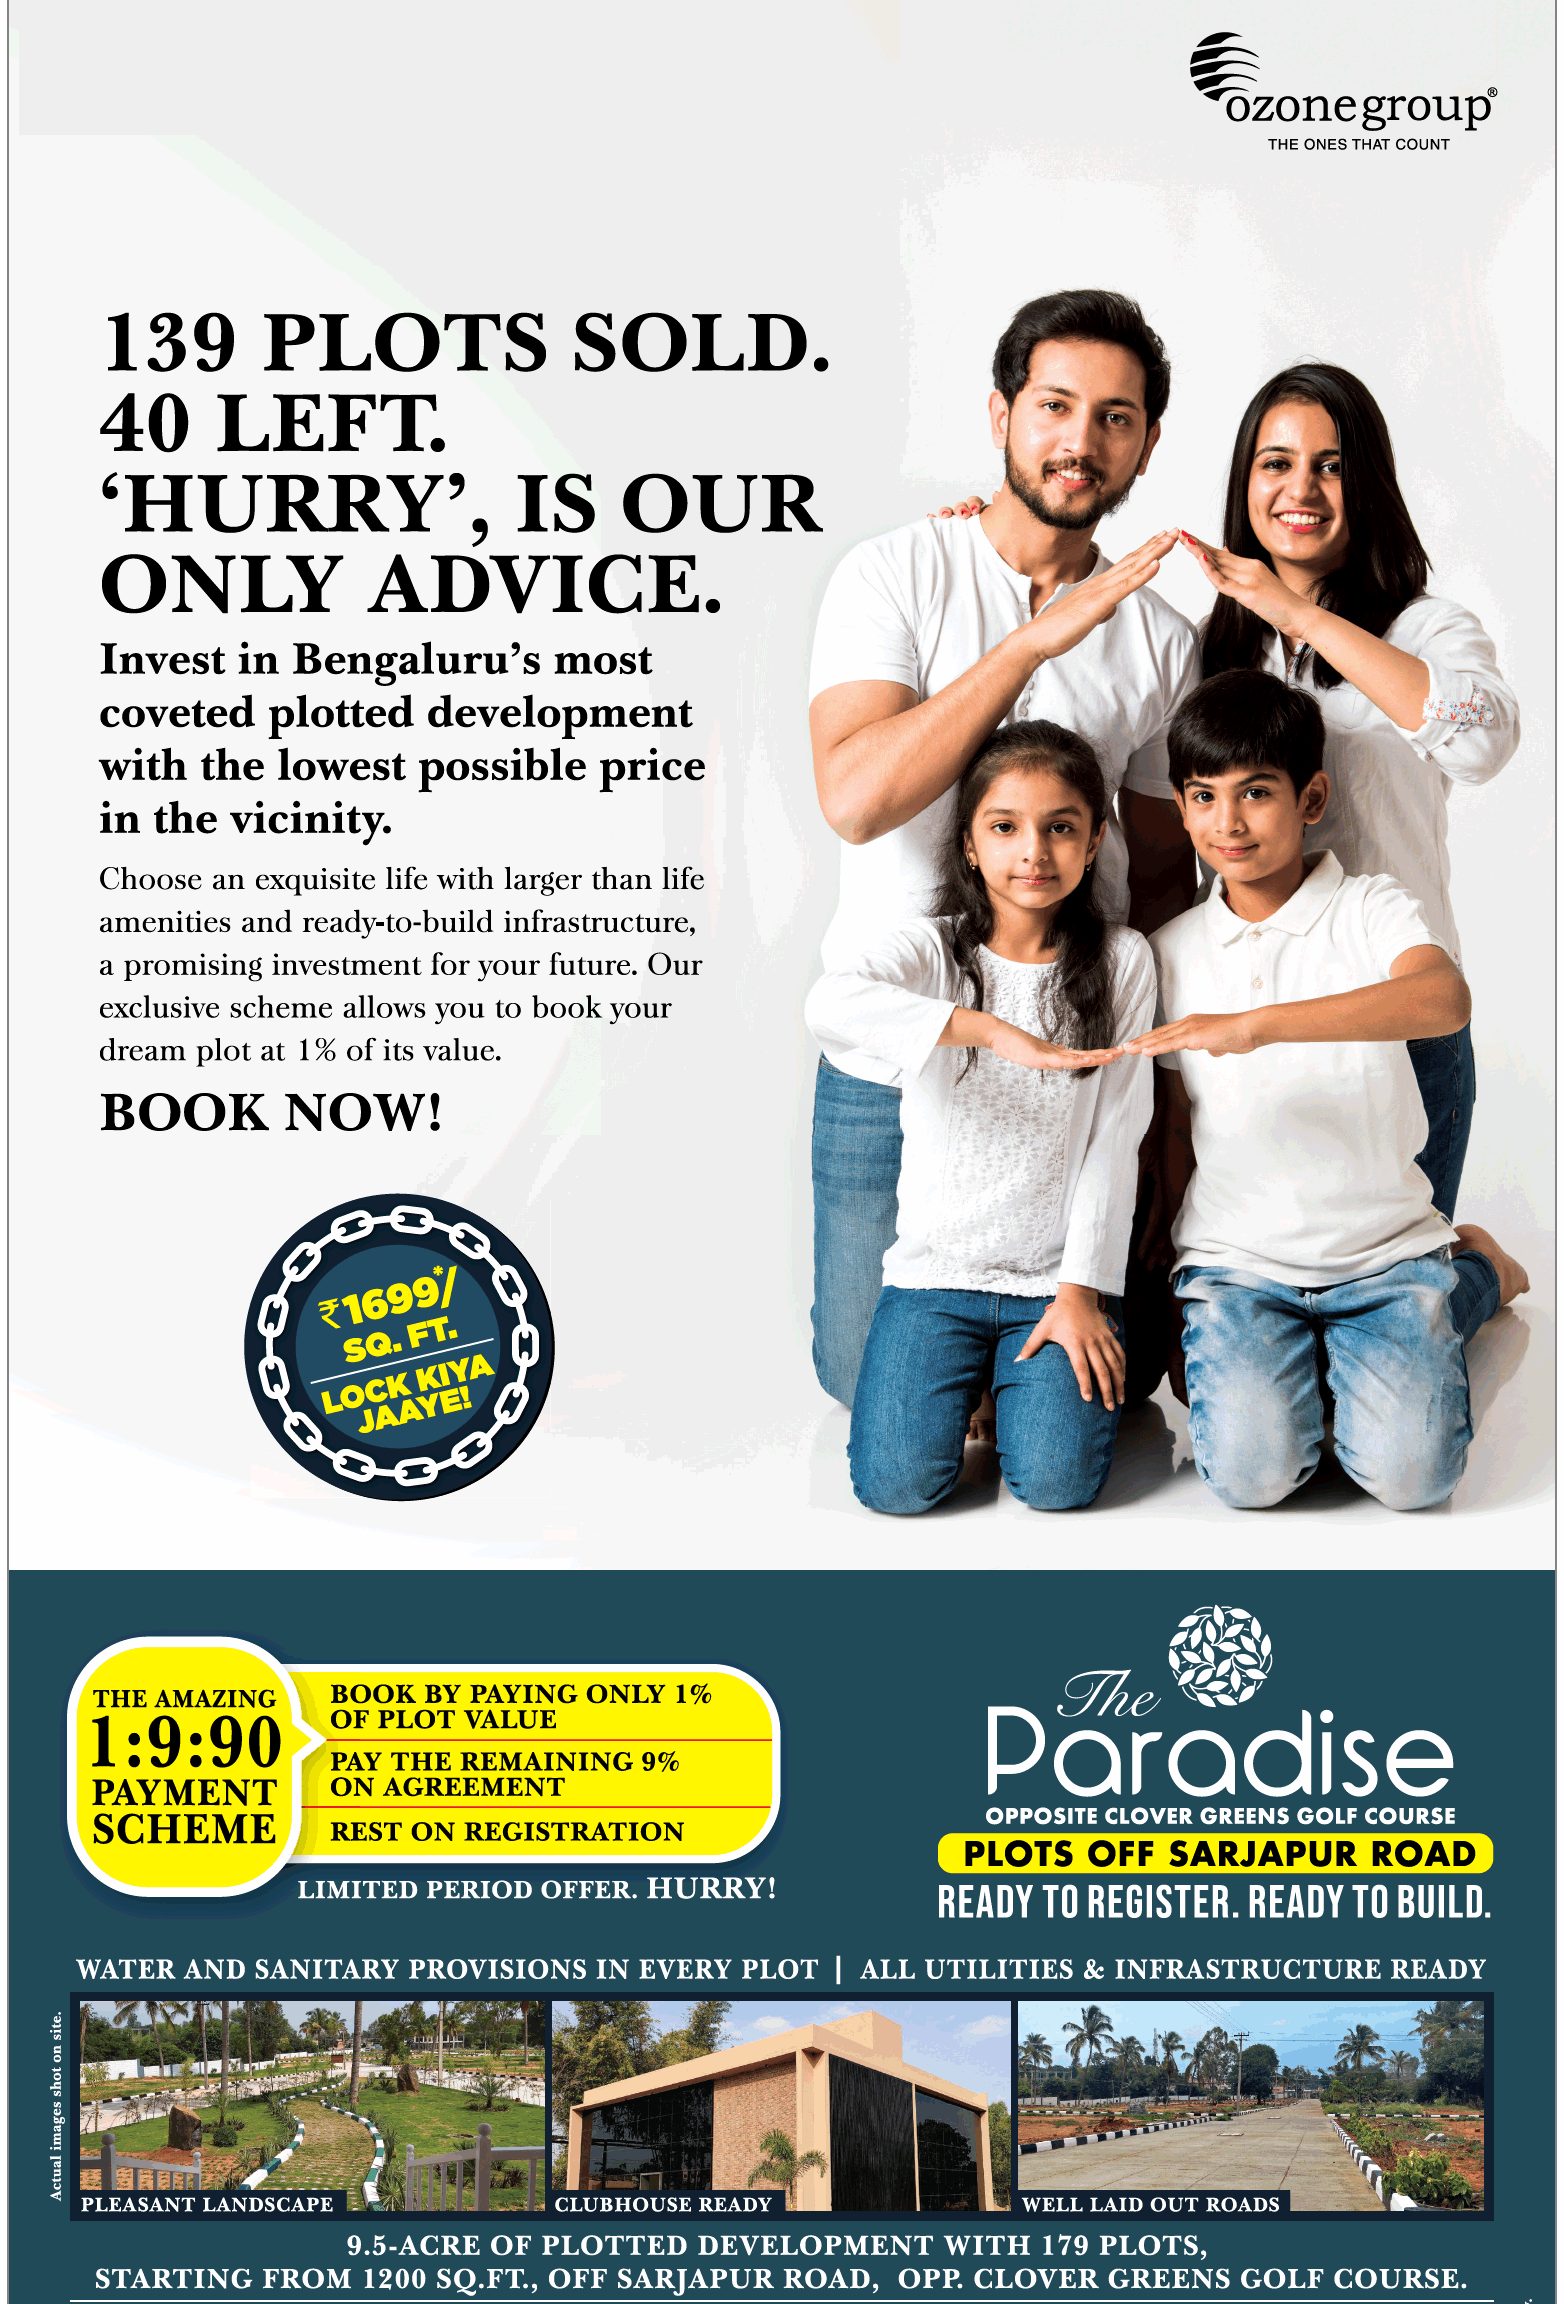 The amazing 1:9:90 payment scheme at Ozone The Paradise in Bangalore Update